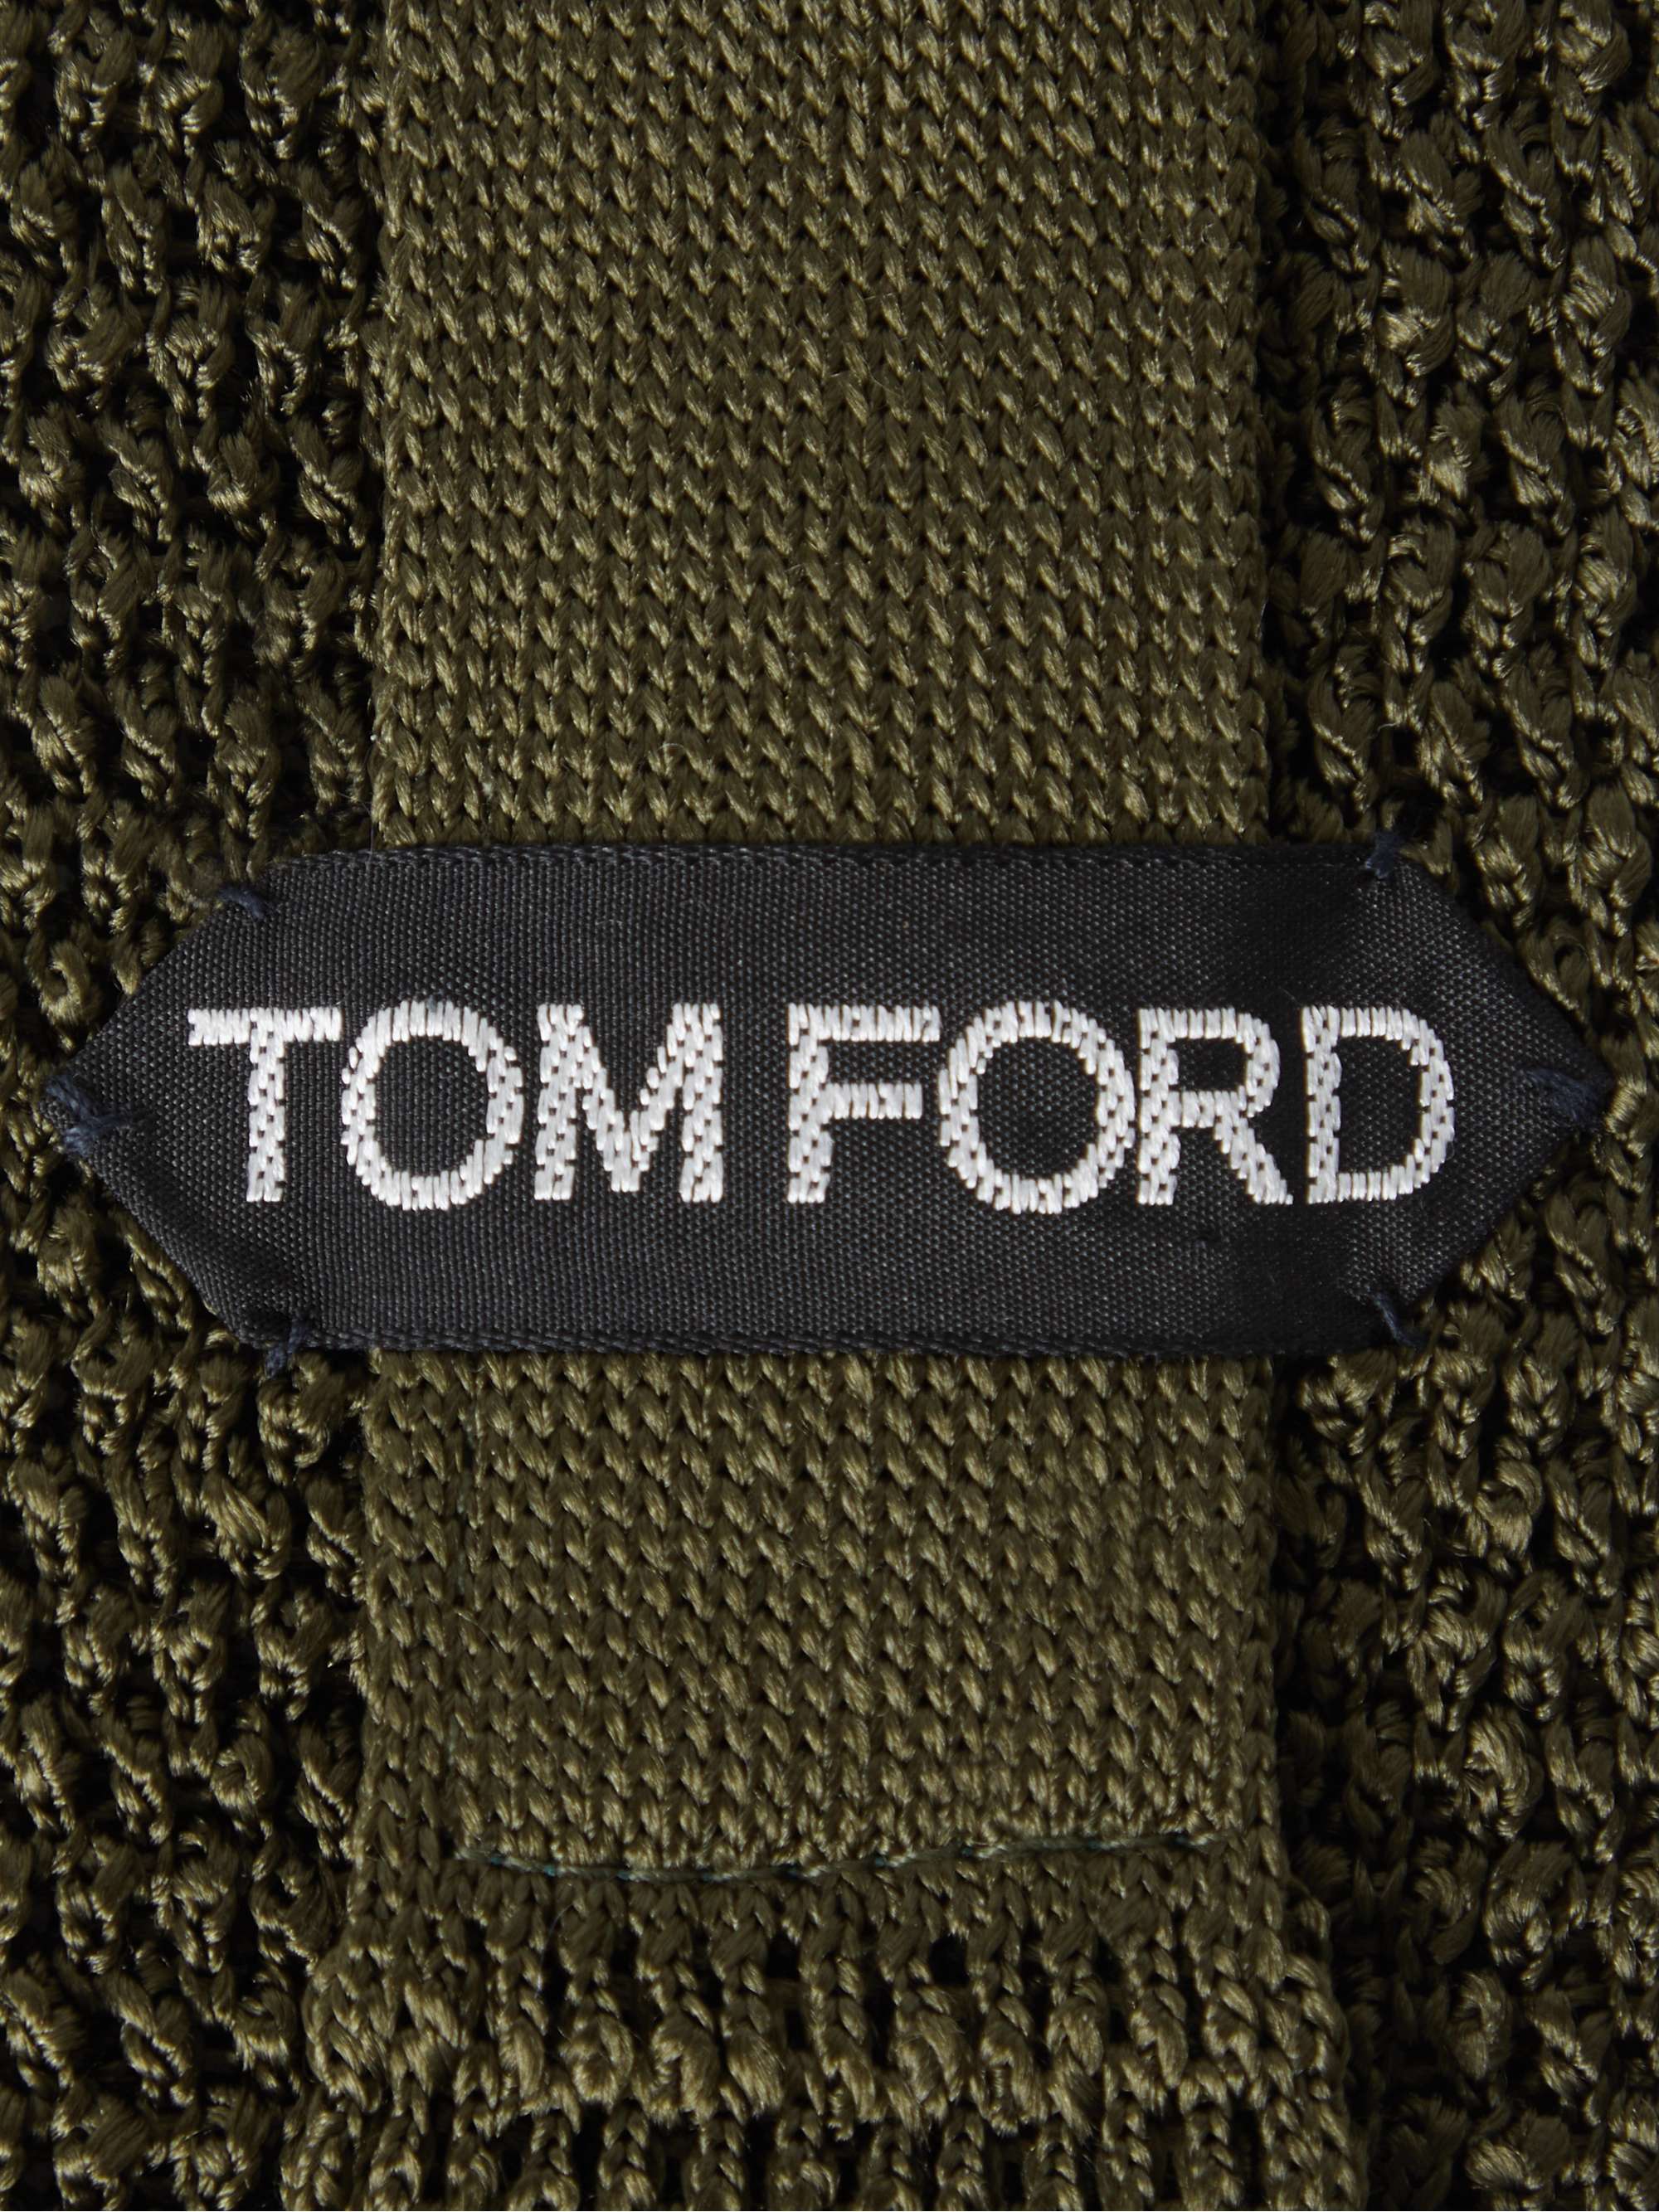 TOM FORD 7.5cm Knitted Silk Tie